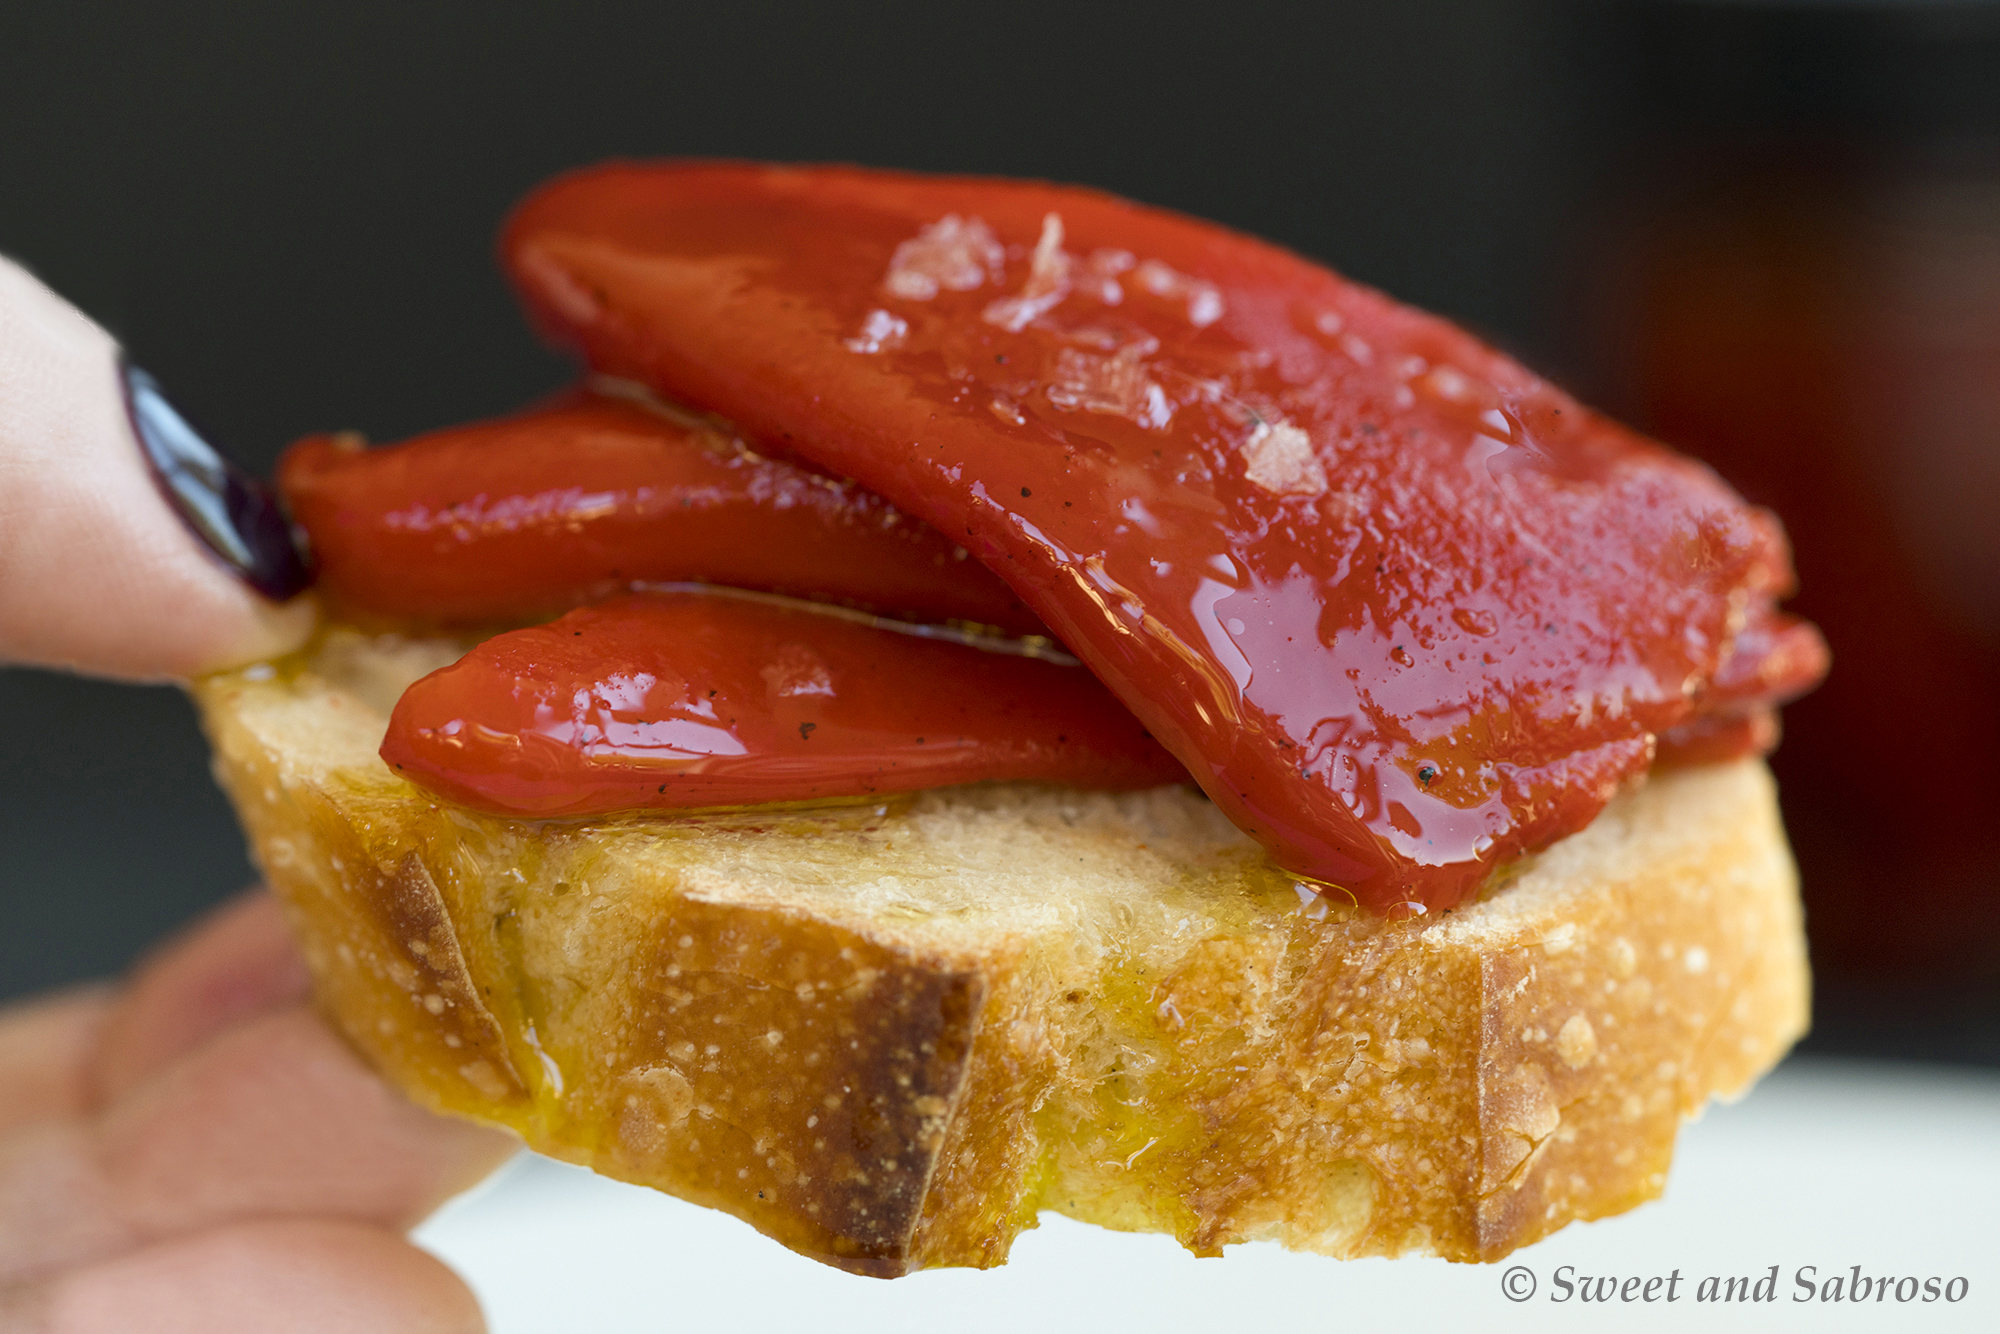 Piquillo Peppers from Spain on a slice of crusty bread with salt and olive oil